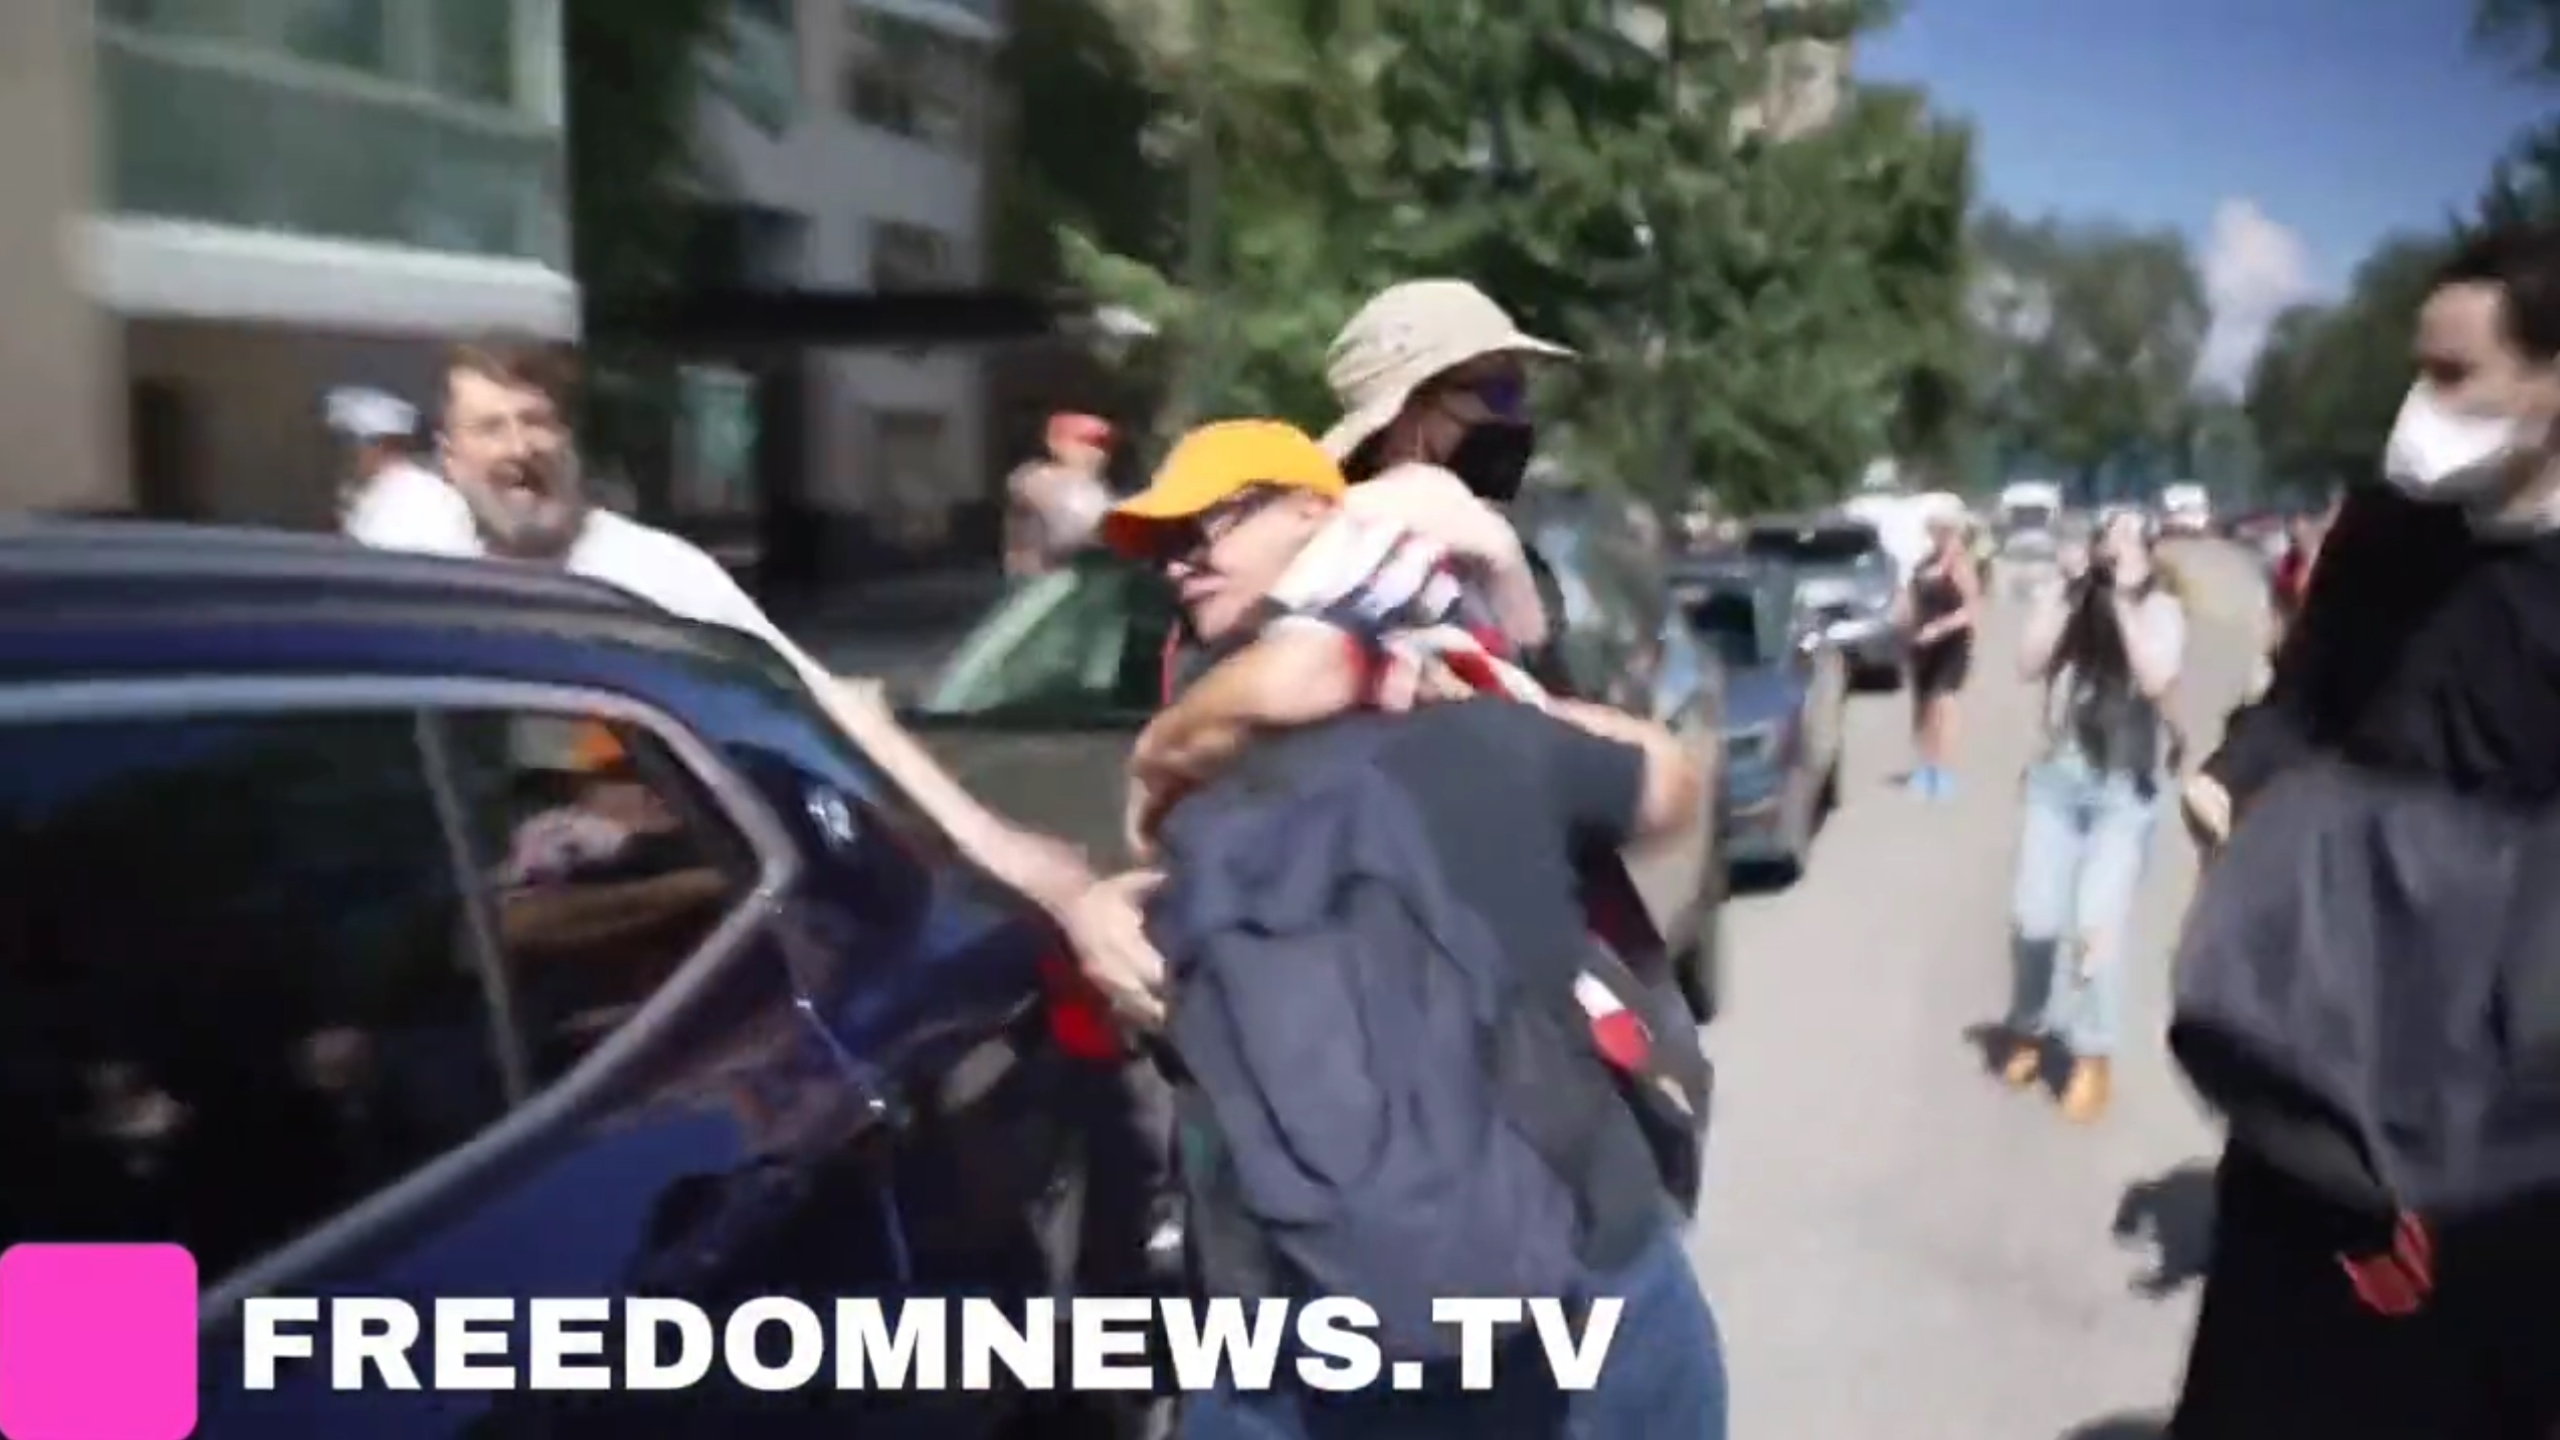 ‘MOVE BACK!’ Massive Brawl Breaks Out at Conservative Agitator Curtis Sliwa’s Anti-Immigration Rally in New York City (mediaite.com)